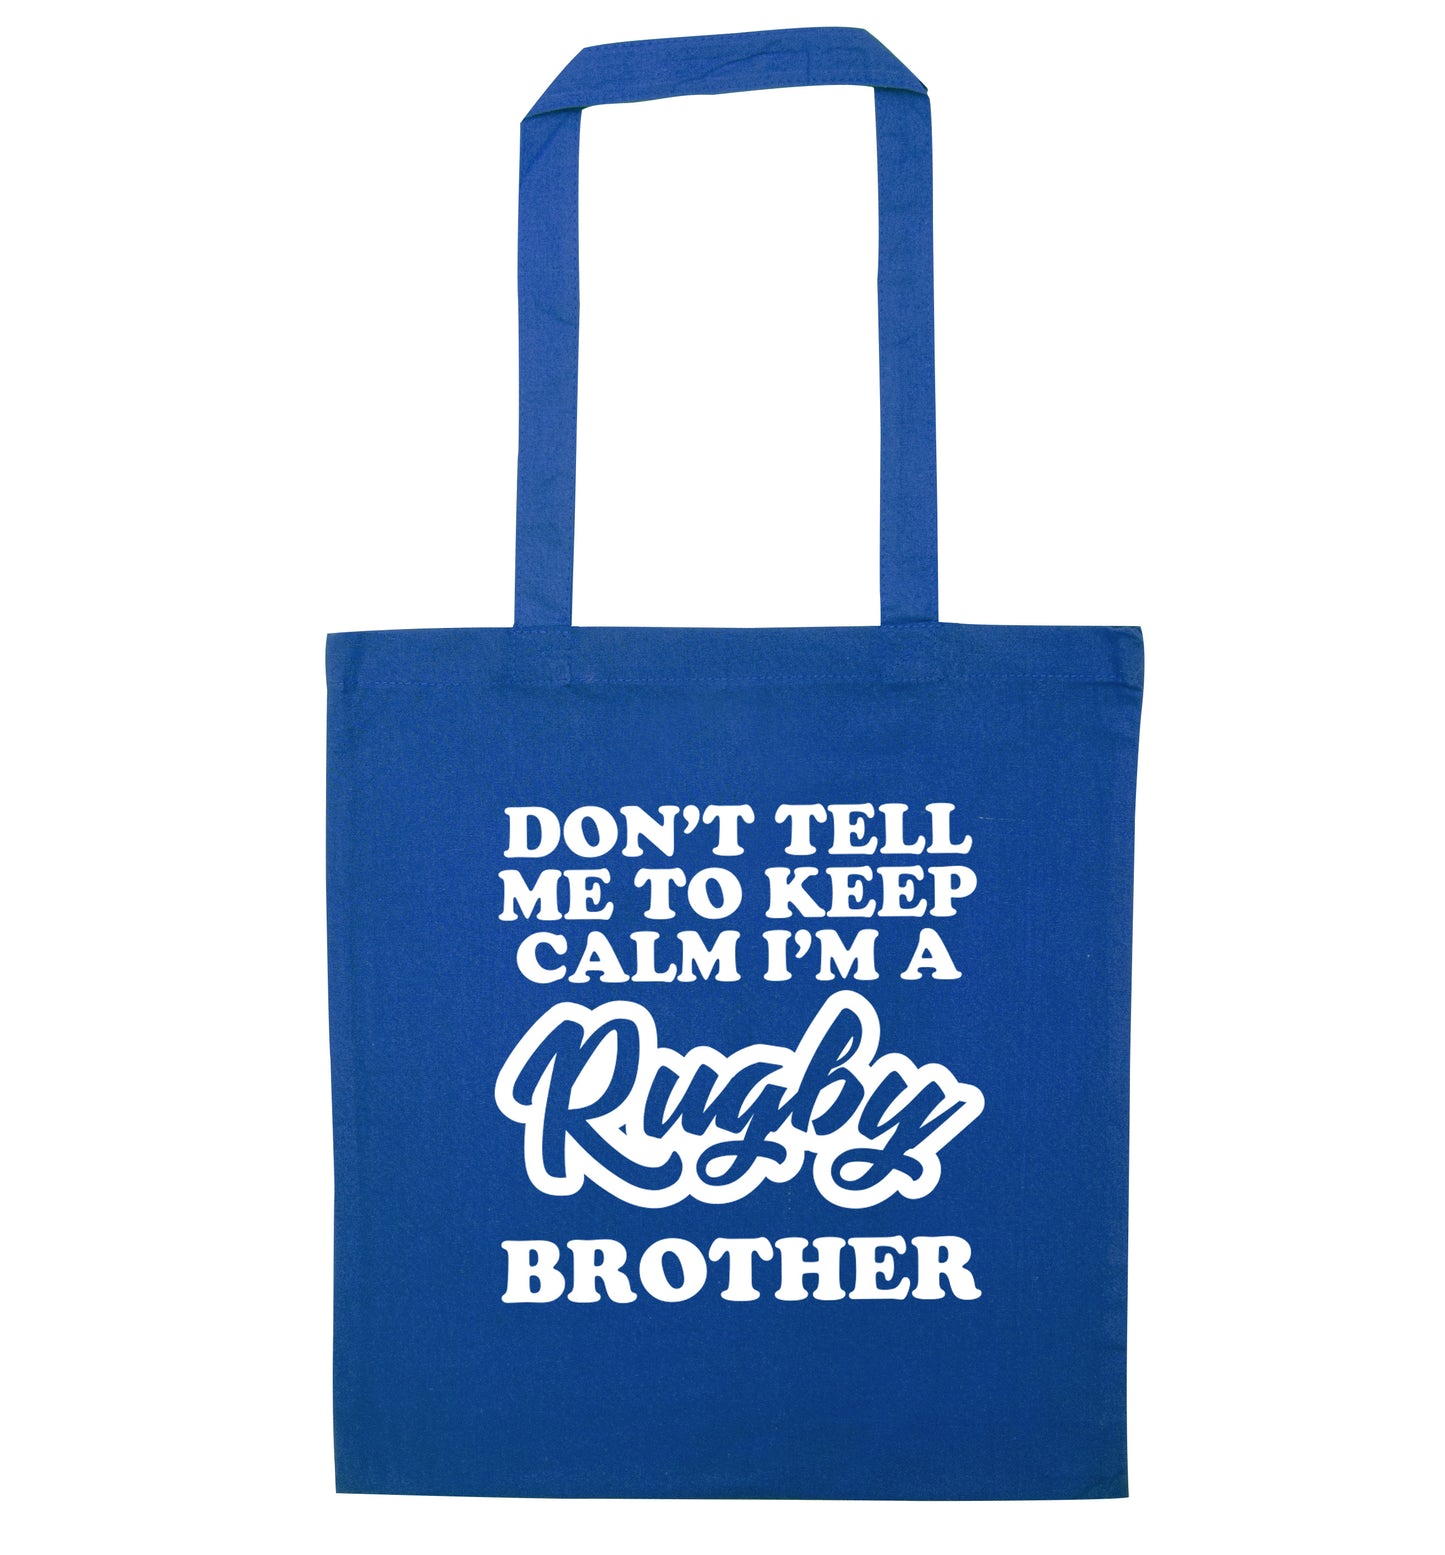 Don't tell me keep calm I'm a rugby brother blue tote bag